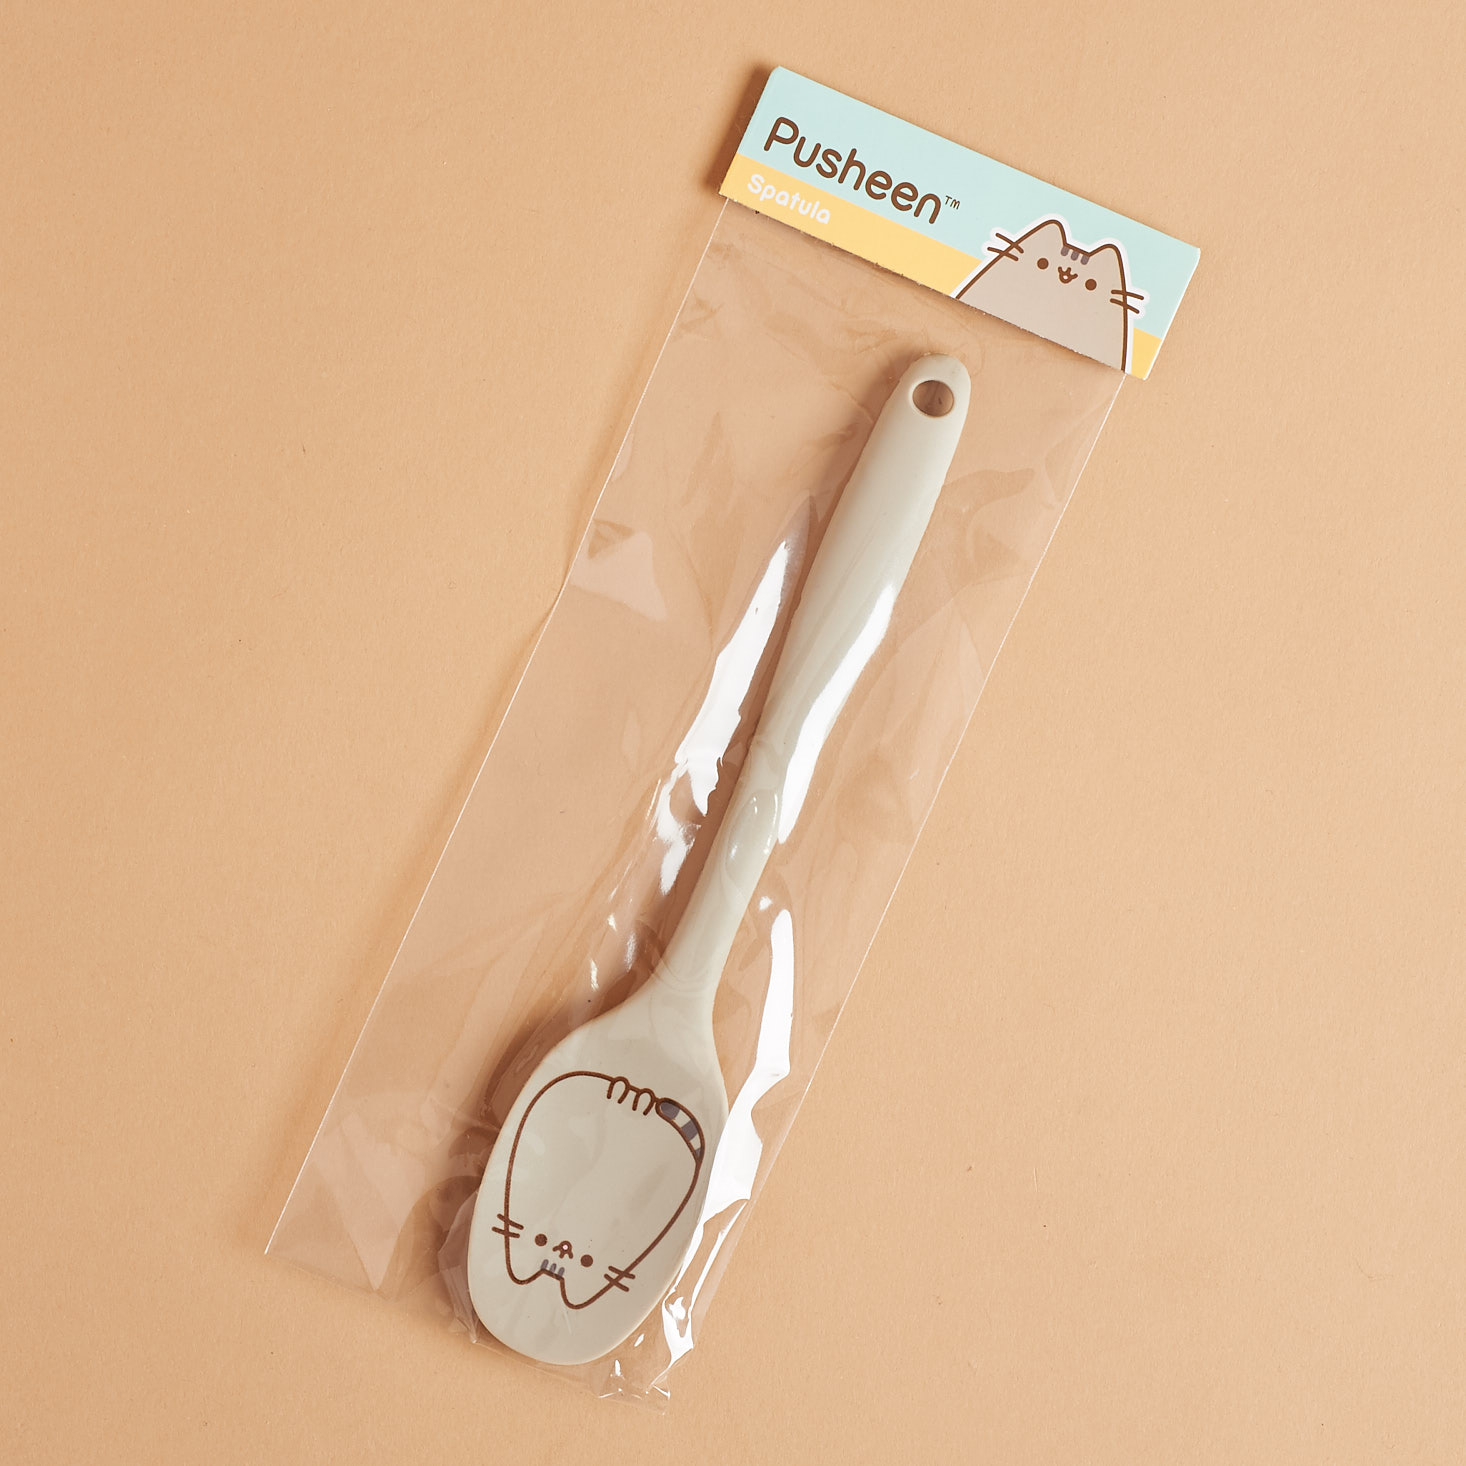 Silicone Pusheen Spatula in package